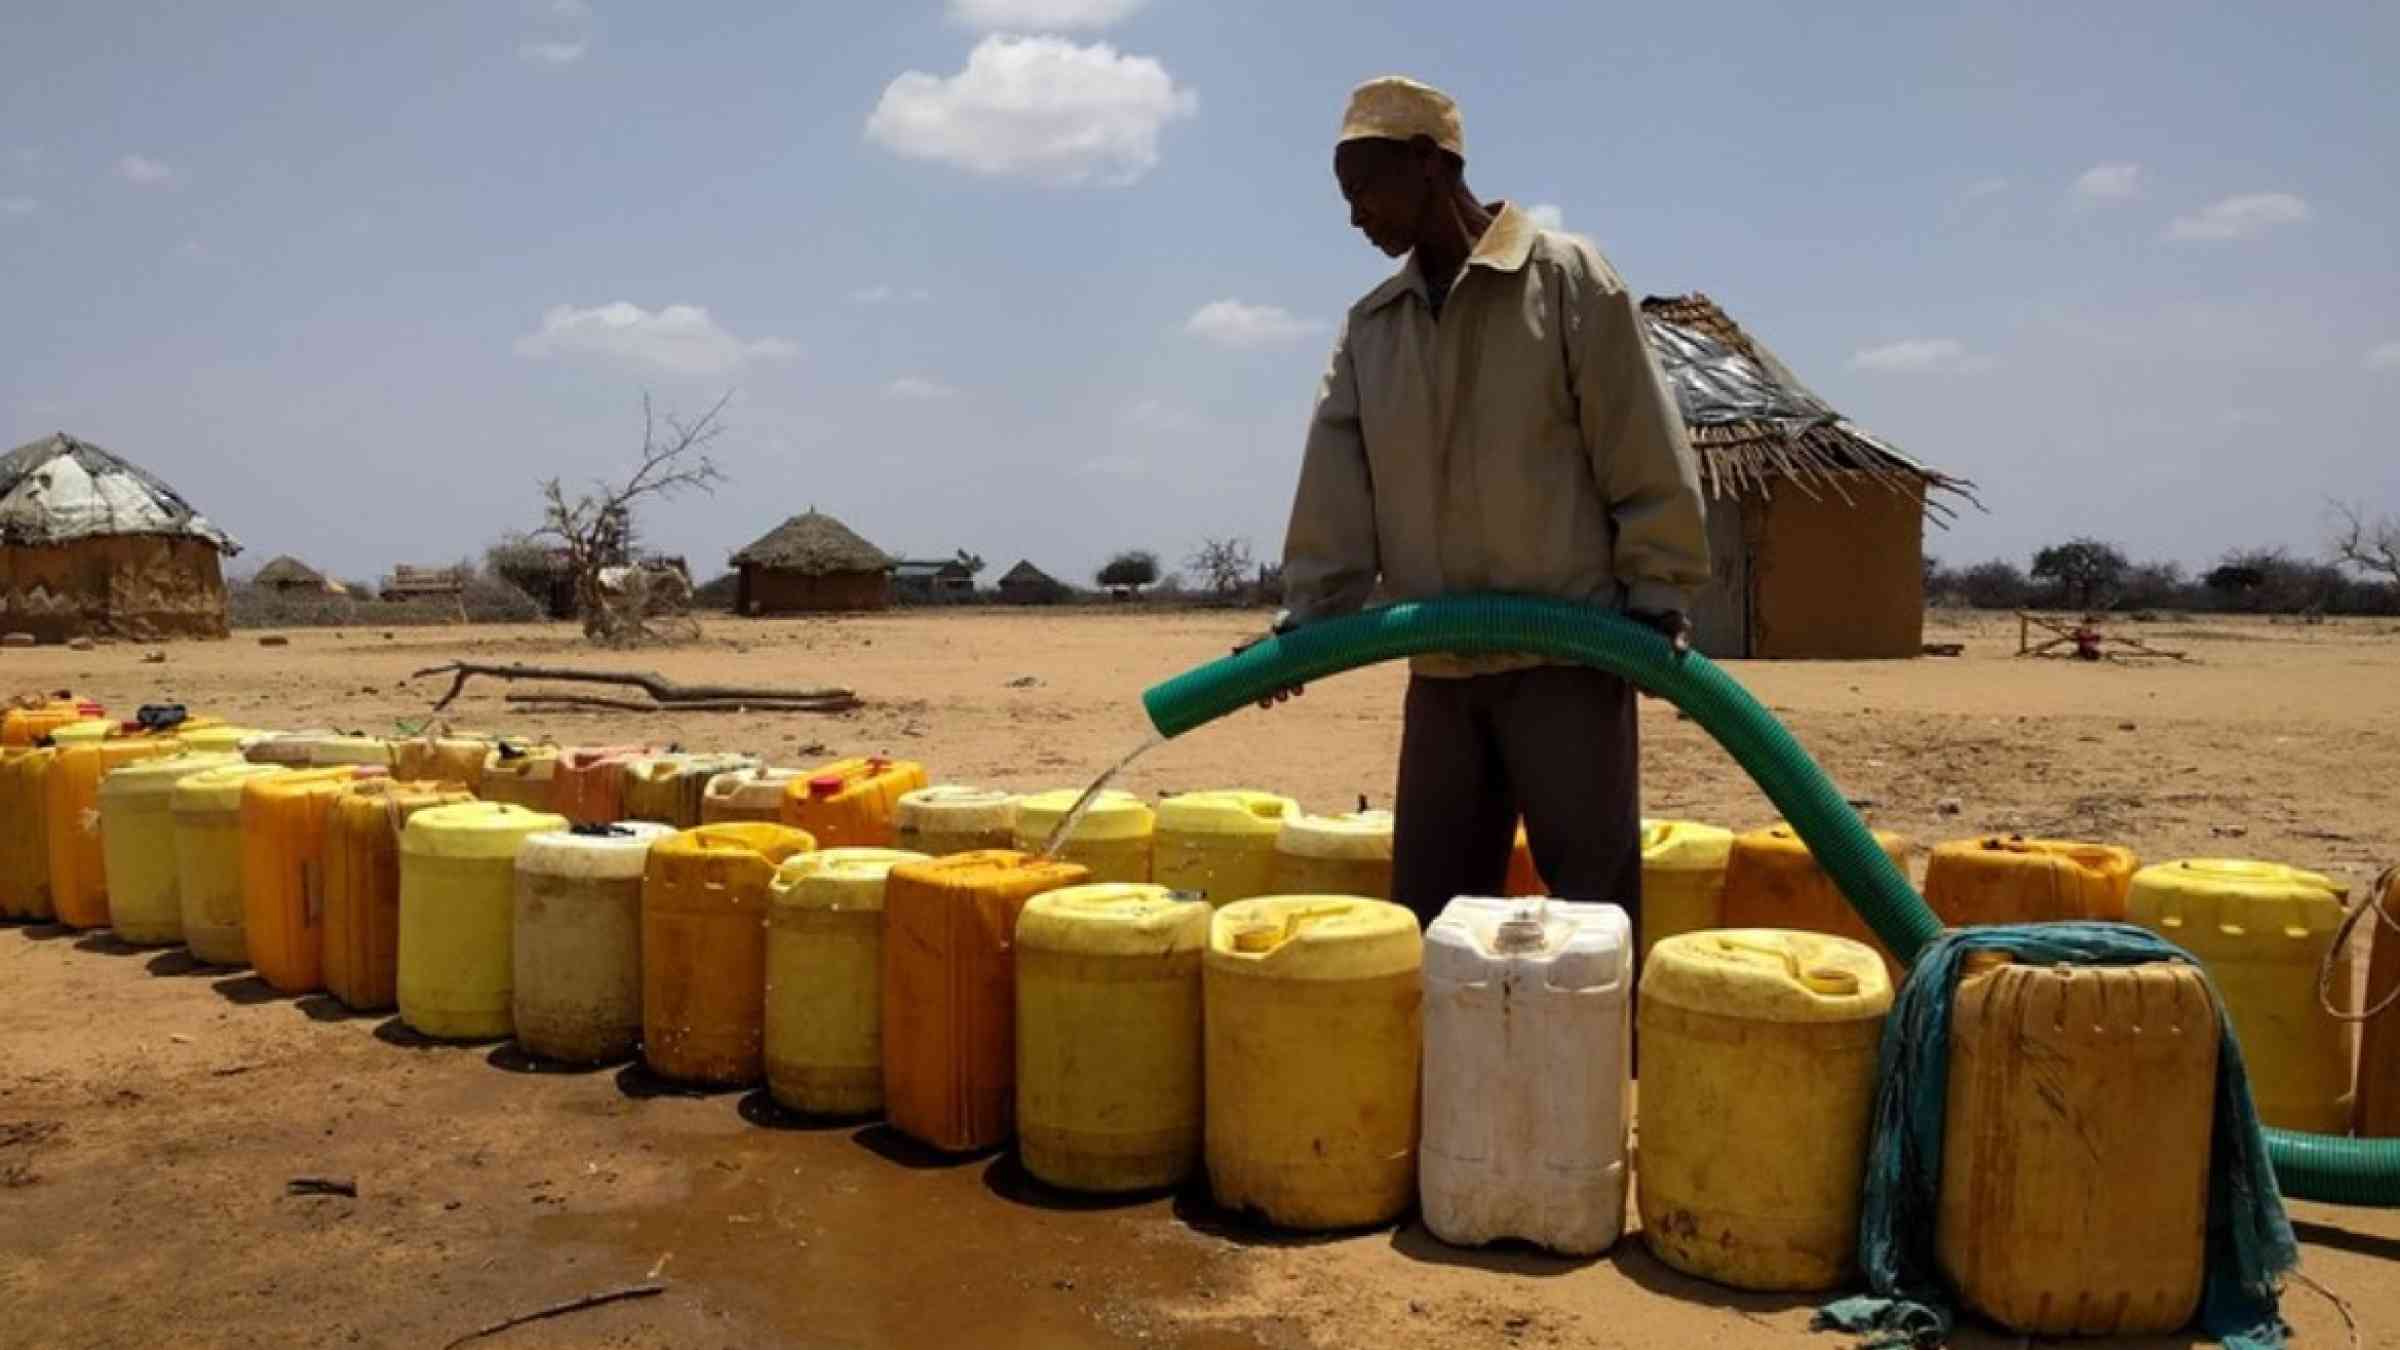 A villager distributes water to be used by households during a drought in northern Kenya